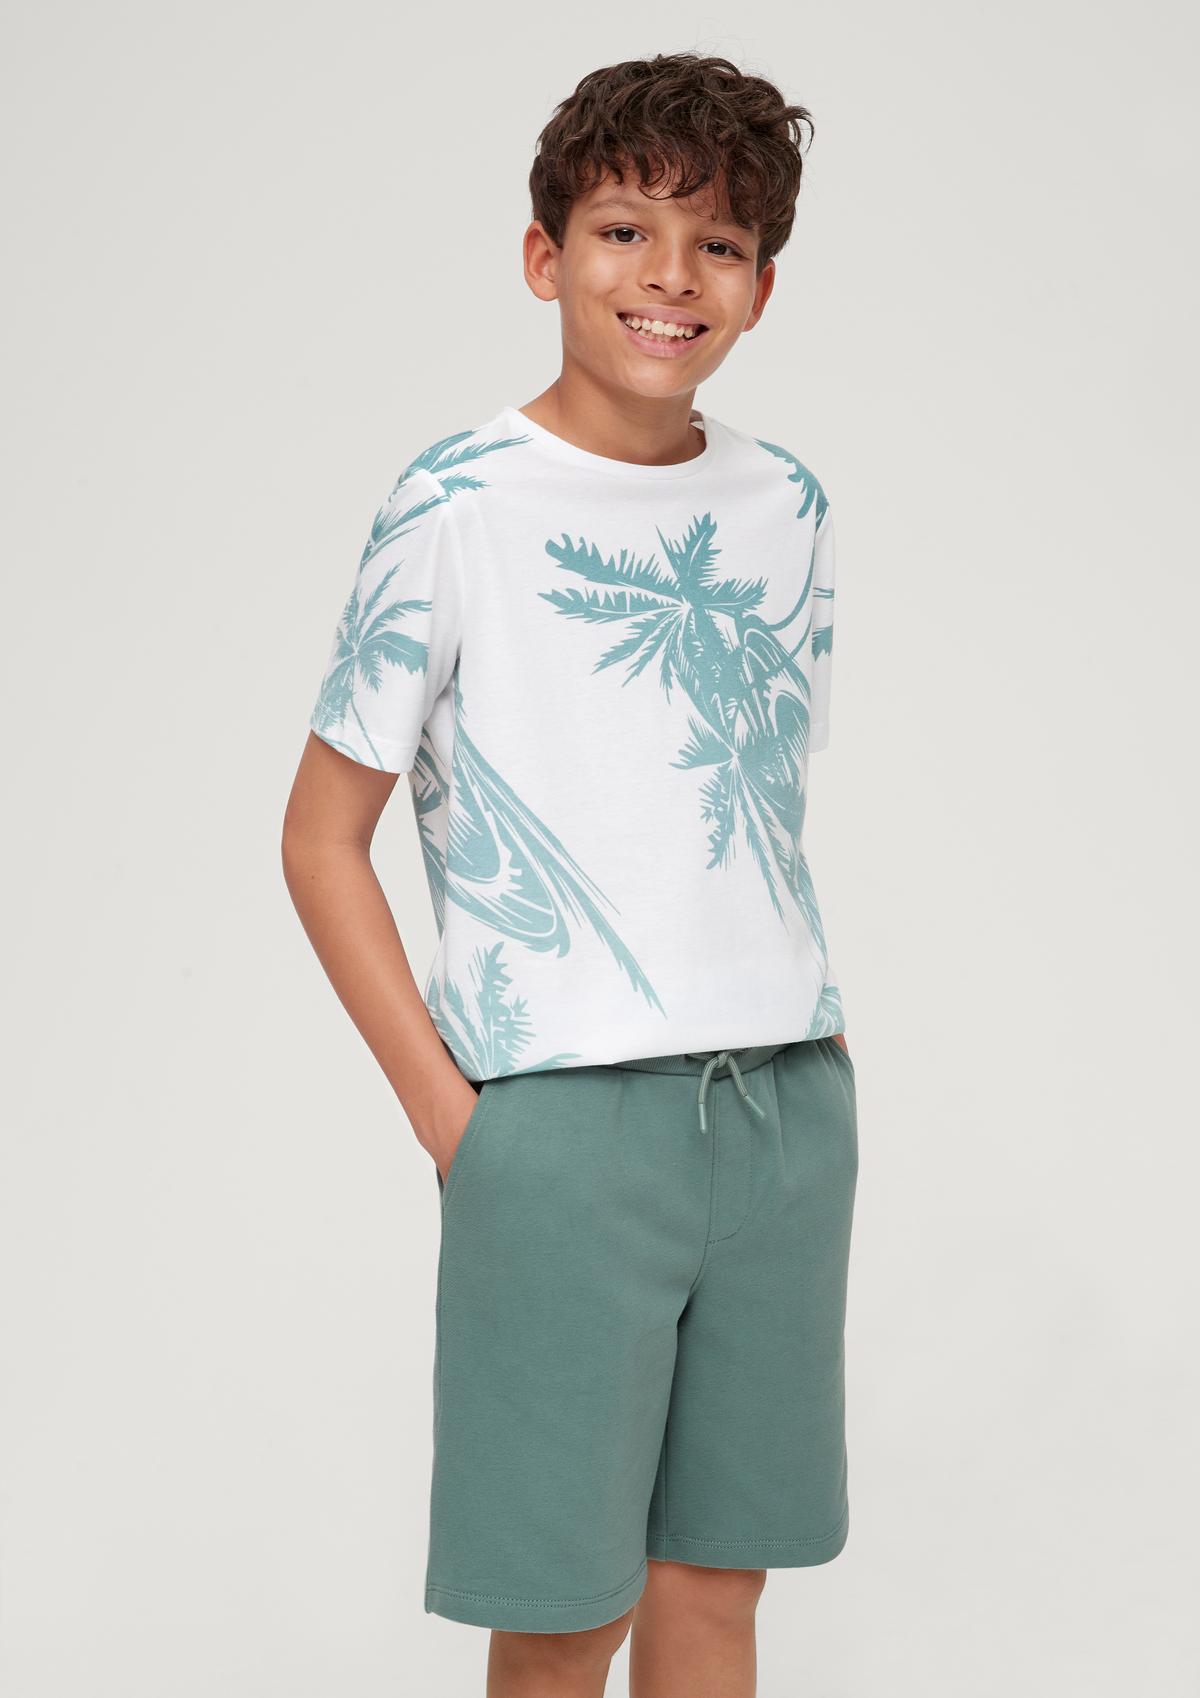 Find for teens Bermuda shorts online boys and